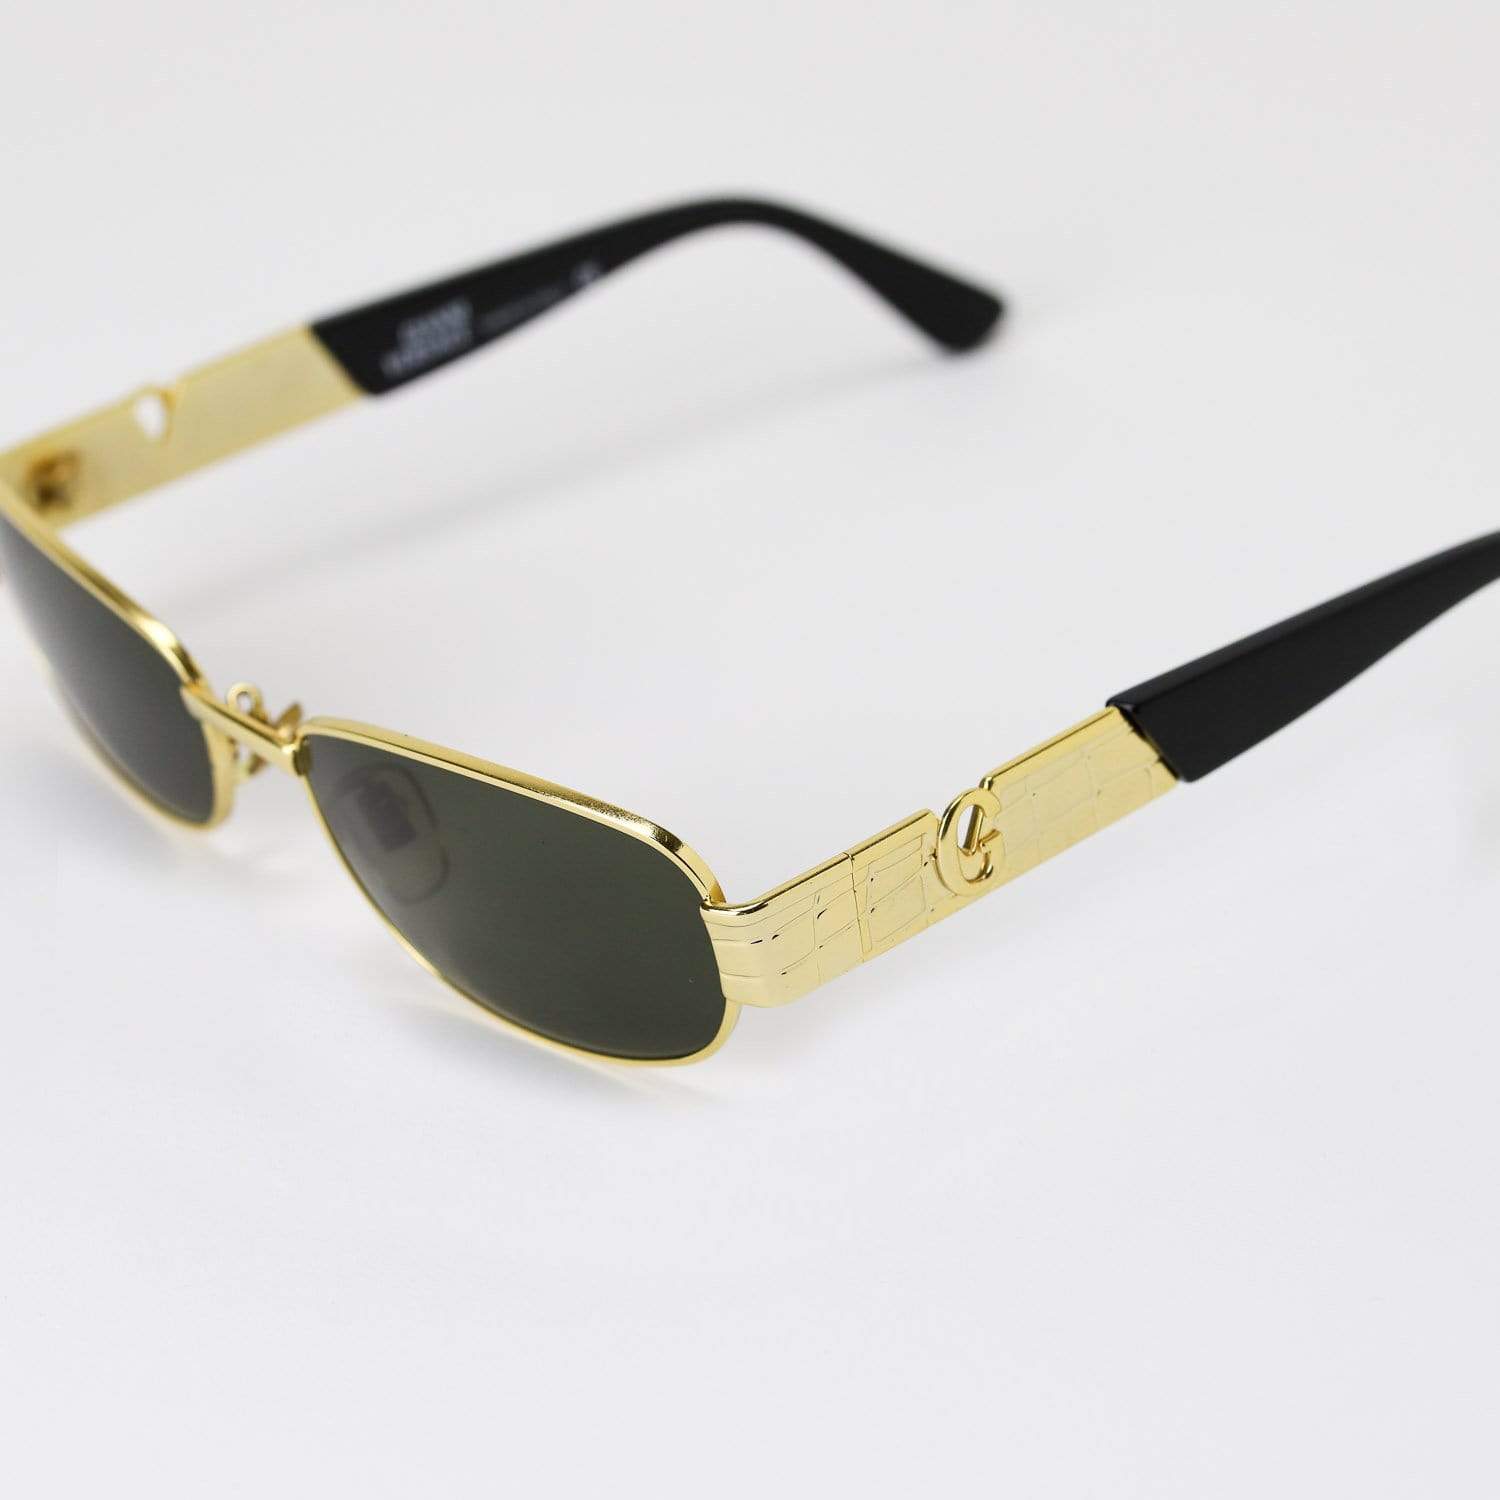 versace glasses gold